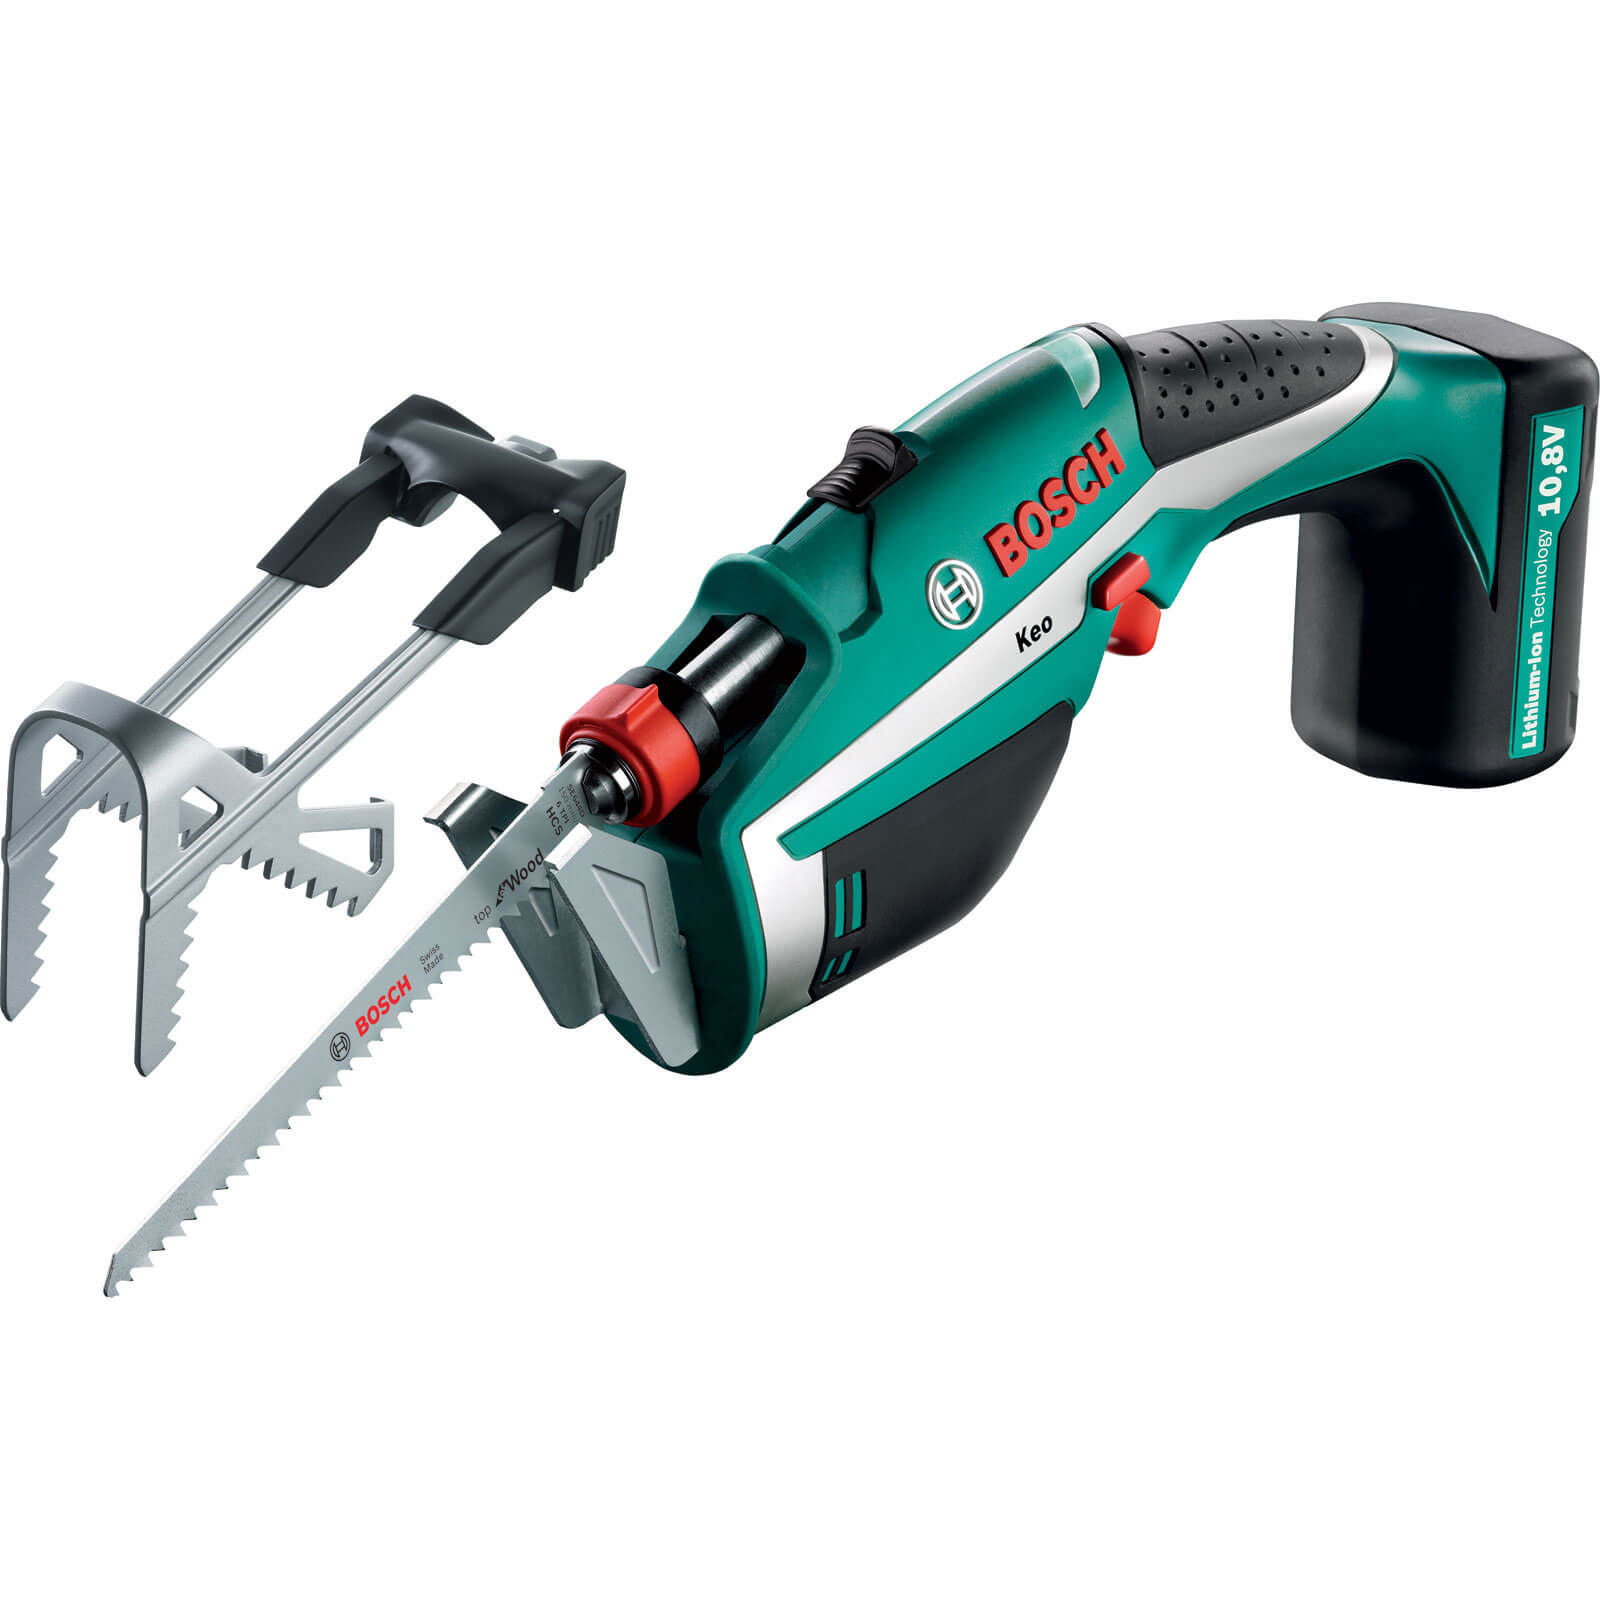 Bosch KEO 10.8v Cordless Reciprocating Garden Pruning Saw with Integral Lithium Ion Battery 1.3ah